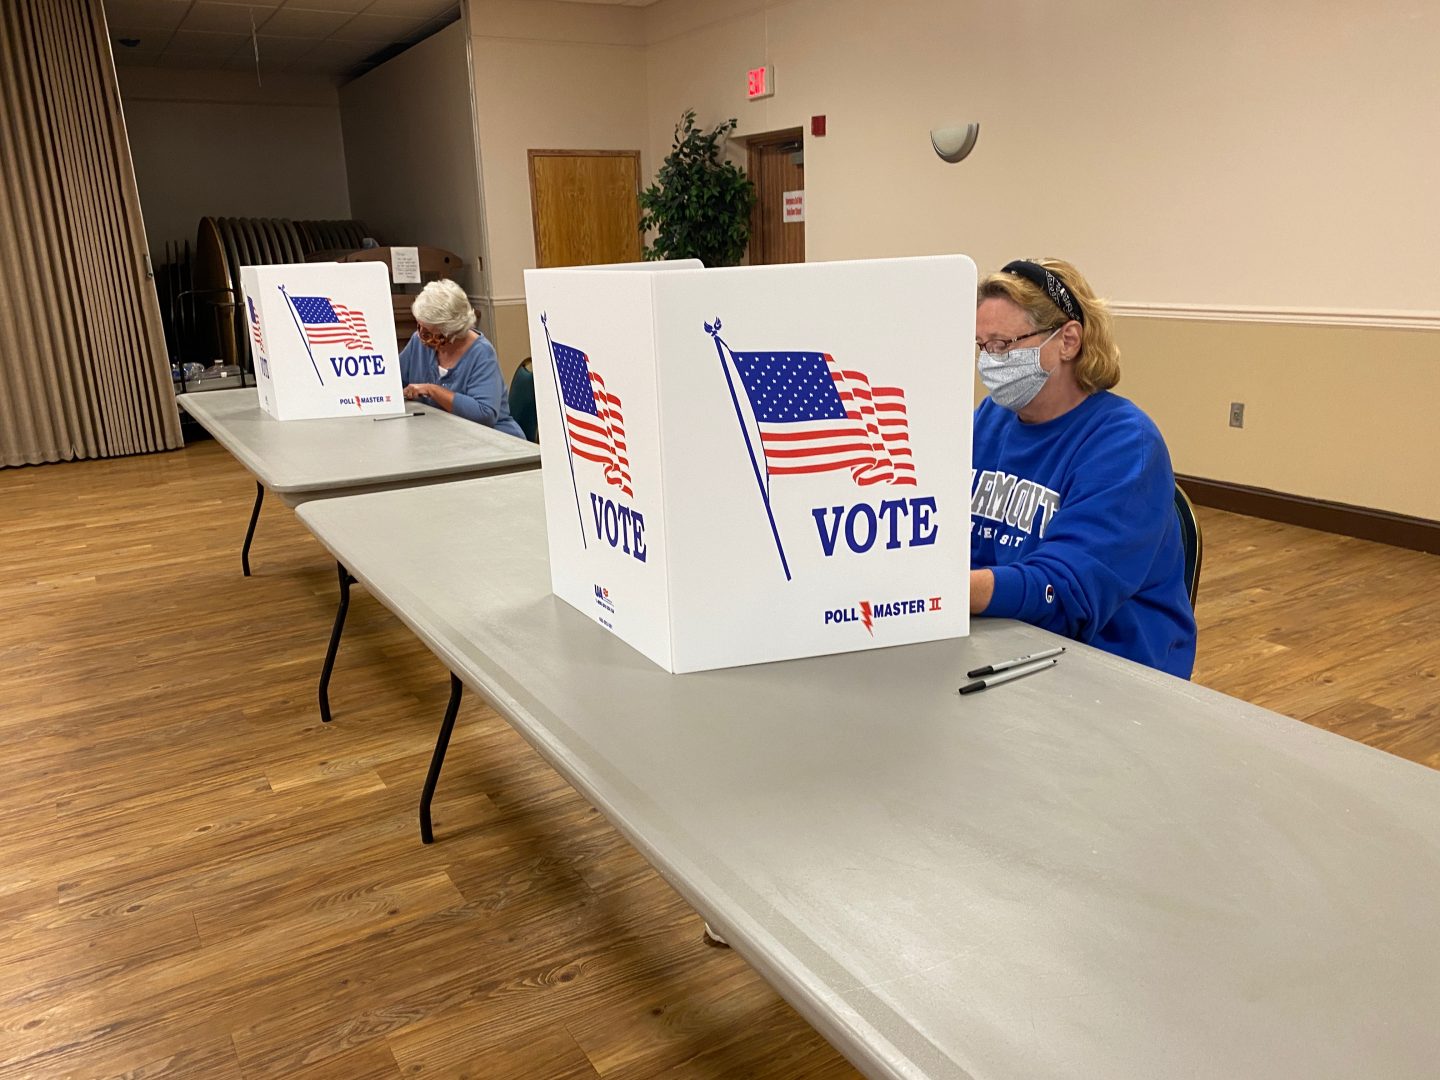 Two voters fill out ballots at the 8th precinct in Swatara Township, Dauphin County, on June 2, 2020. Desks were separated by more space than usual to accommodate social distancing guidelines for coronavirus.